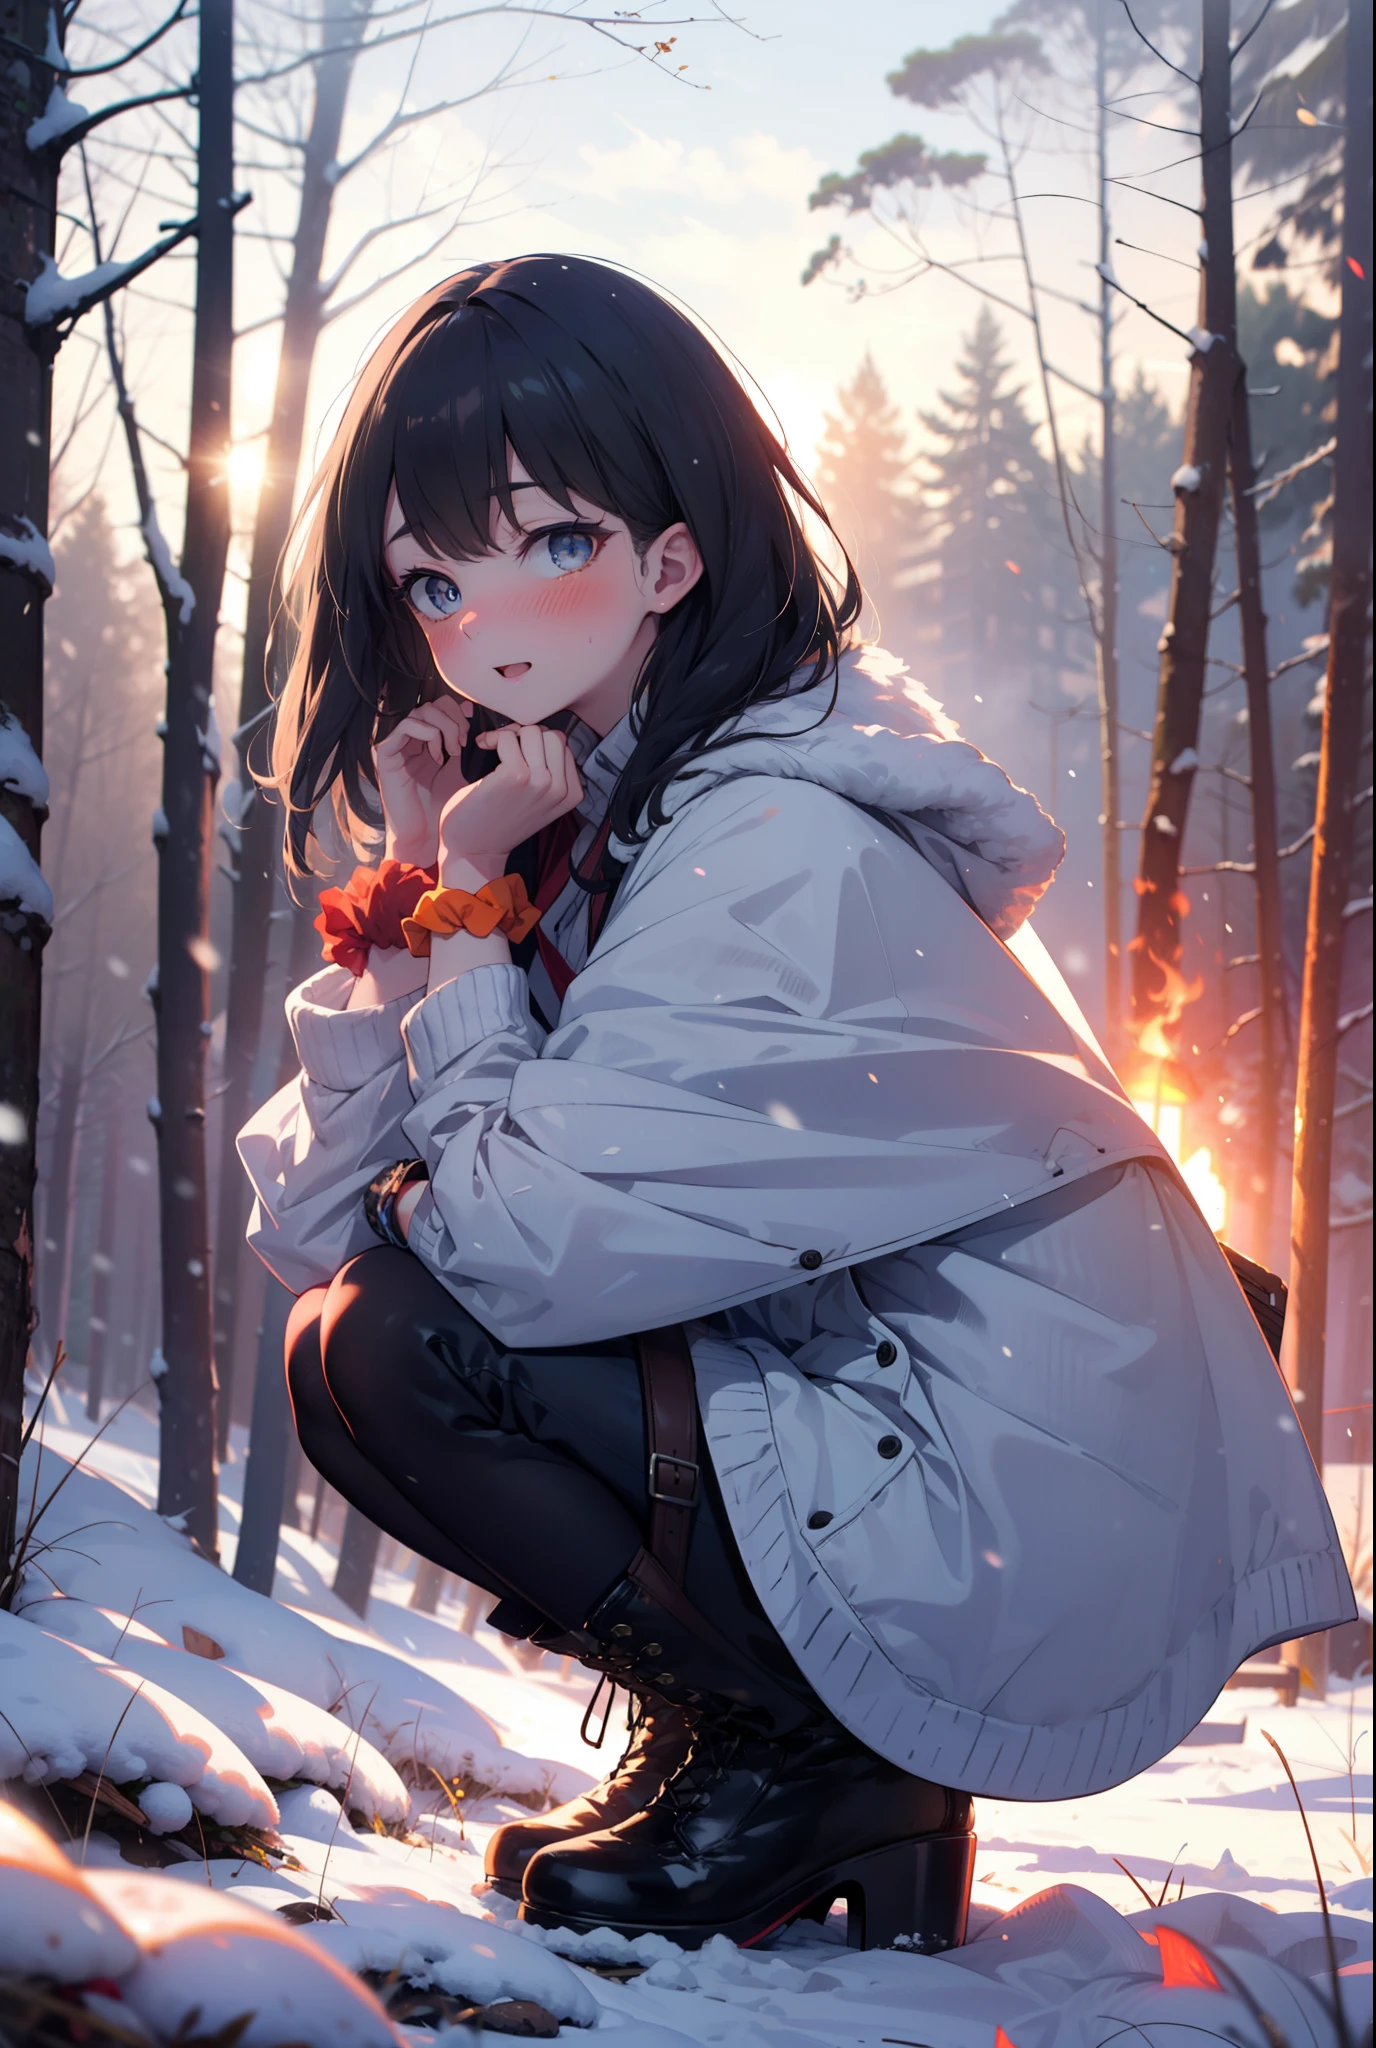 6 flowers, rikka takarada, Black Hair, blue eyes, Long Hair, orange Scrunchie, Scrunchie, wrist Scrunchie,smile,blush,White Breath,
Open your mouth,snow,Ground bonfire, Outdoor, boots, snowing, From the side, wood, suitcase, Cape, Blurred, Increase your meals, forest, White handbag, nature,  Squat, Mouth closed, フードed Cape, winter, Written boundary depth, Black shoes, red Cape break looking at viewer, Upper Body, whole body, break Outdoor, forest, nature, break (masterpiece:1.2), highest quality, High resolution, unity 8k wallpaper, (shape:0.8), (Beautiful and beautiful eyes:1.6), Highly detailed face, Perfect lighting, Highly detailed CG, (Perfect hands, Perfect Anatomy),